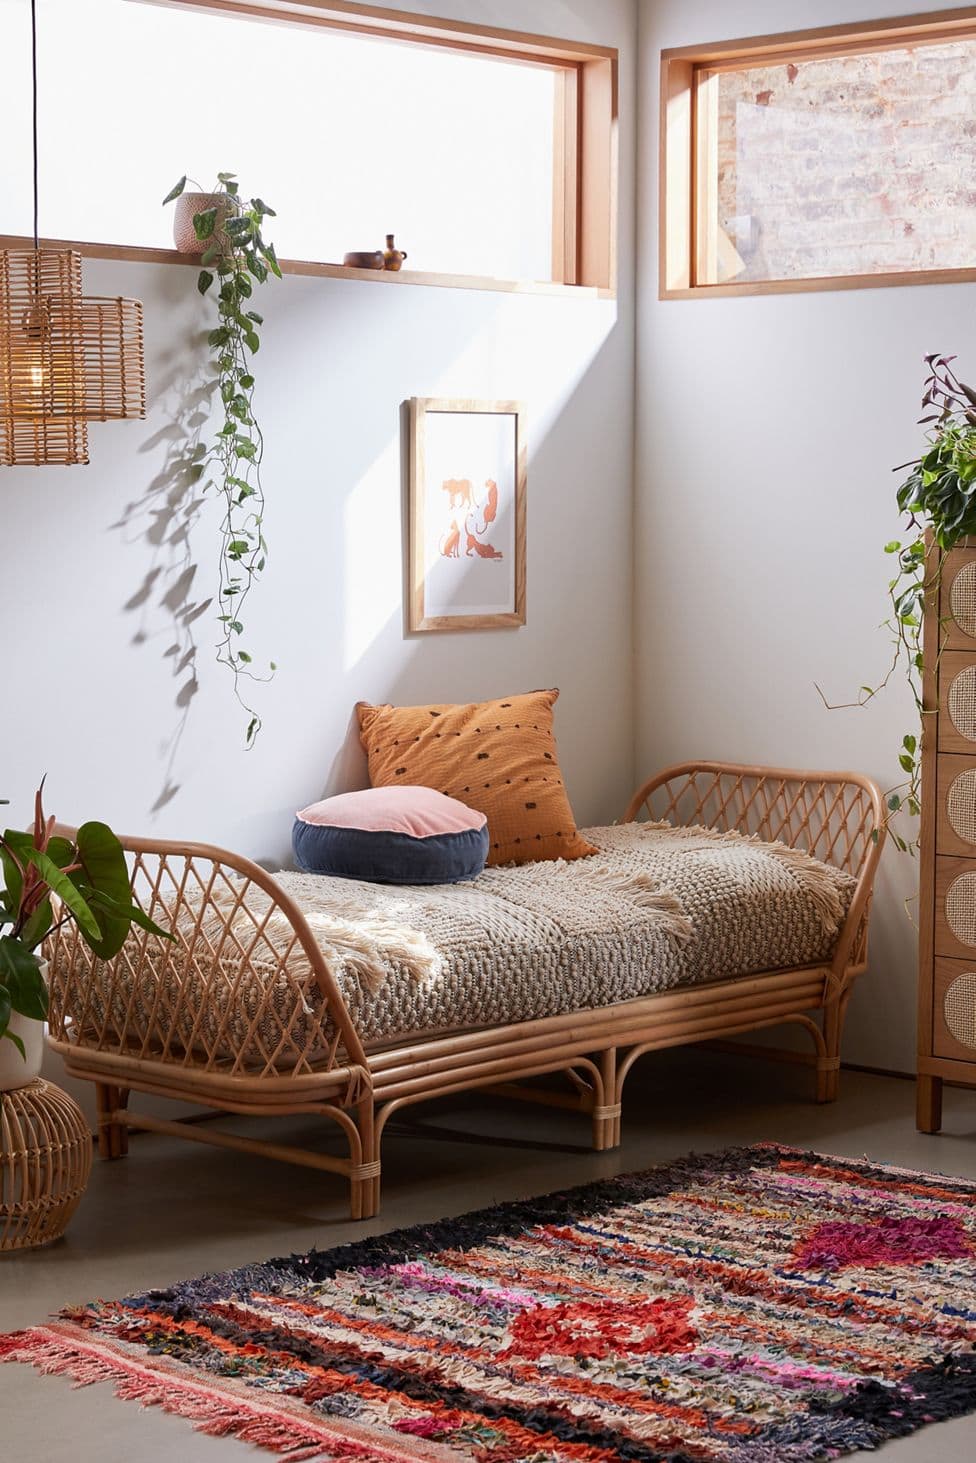 Play Double-Duty with this Rattan Daybed